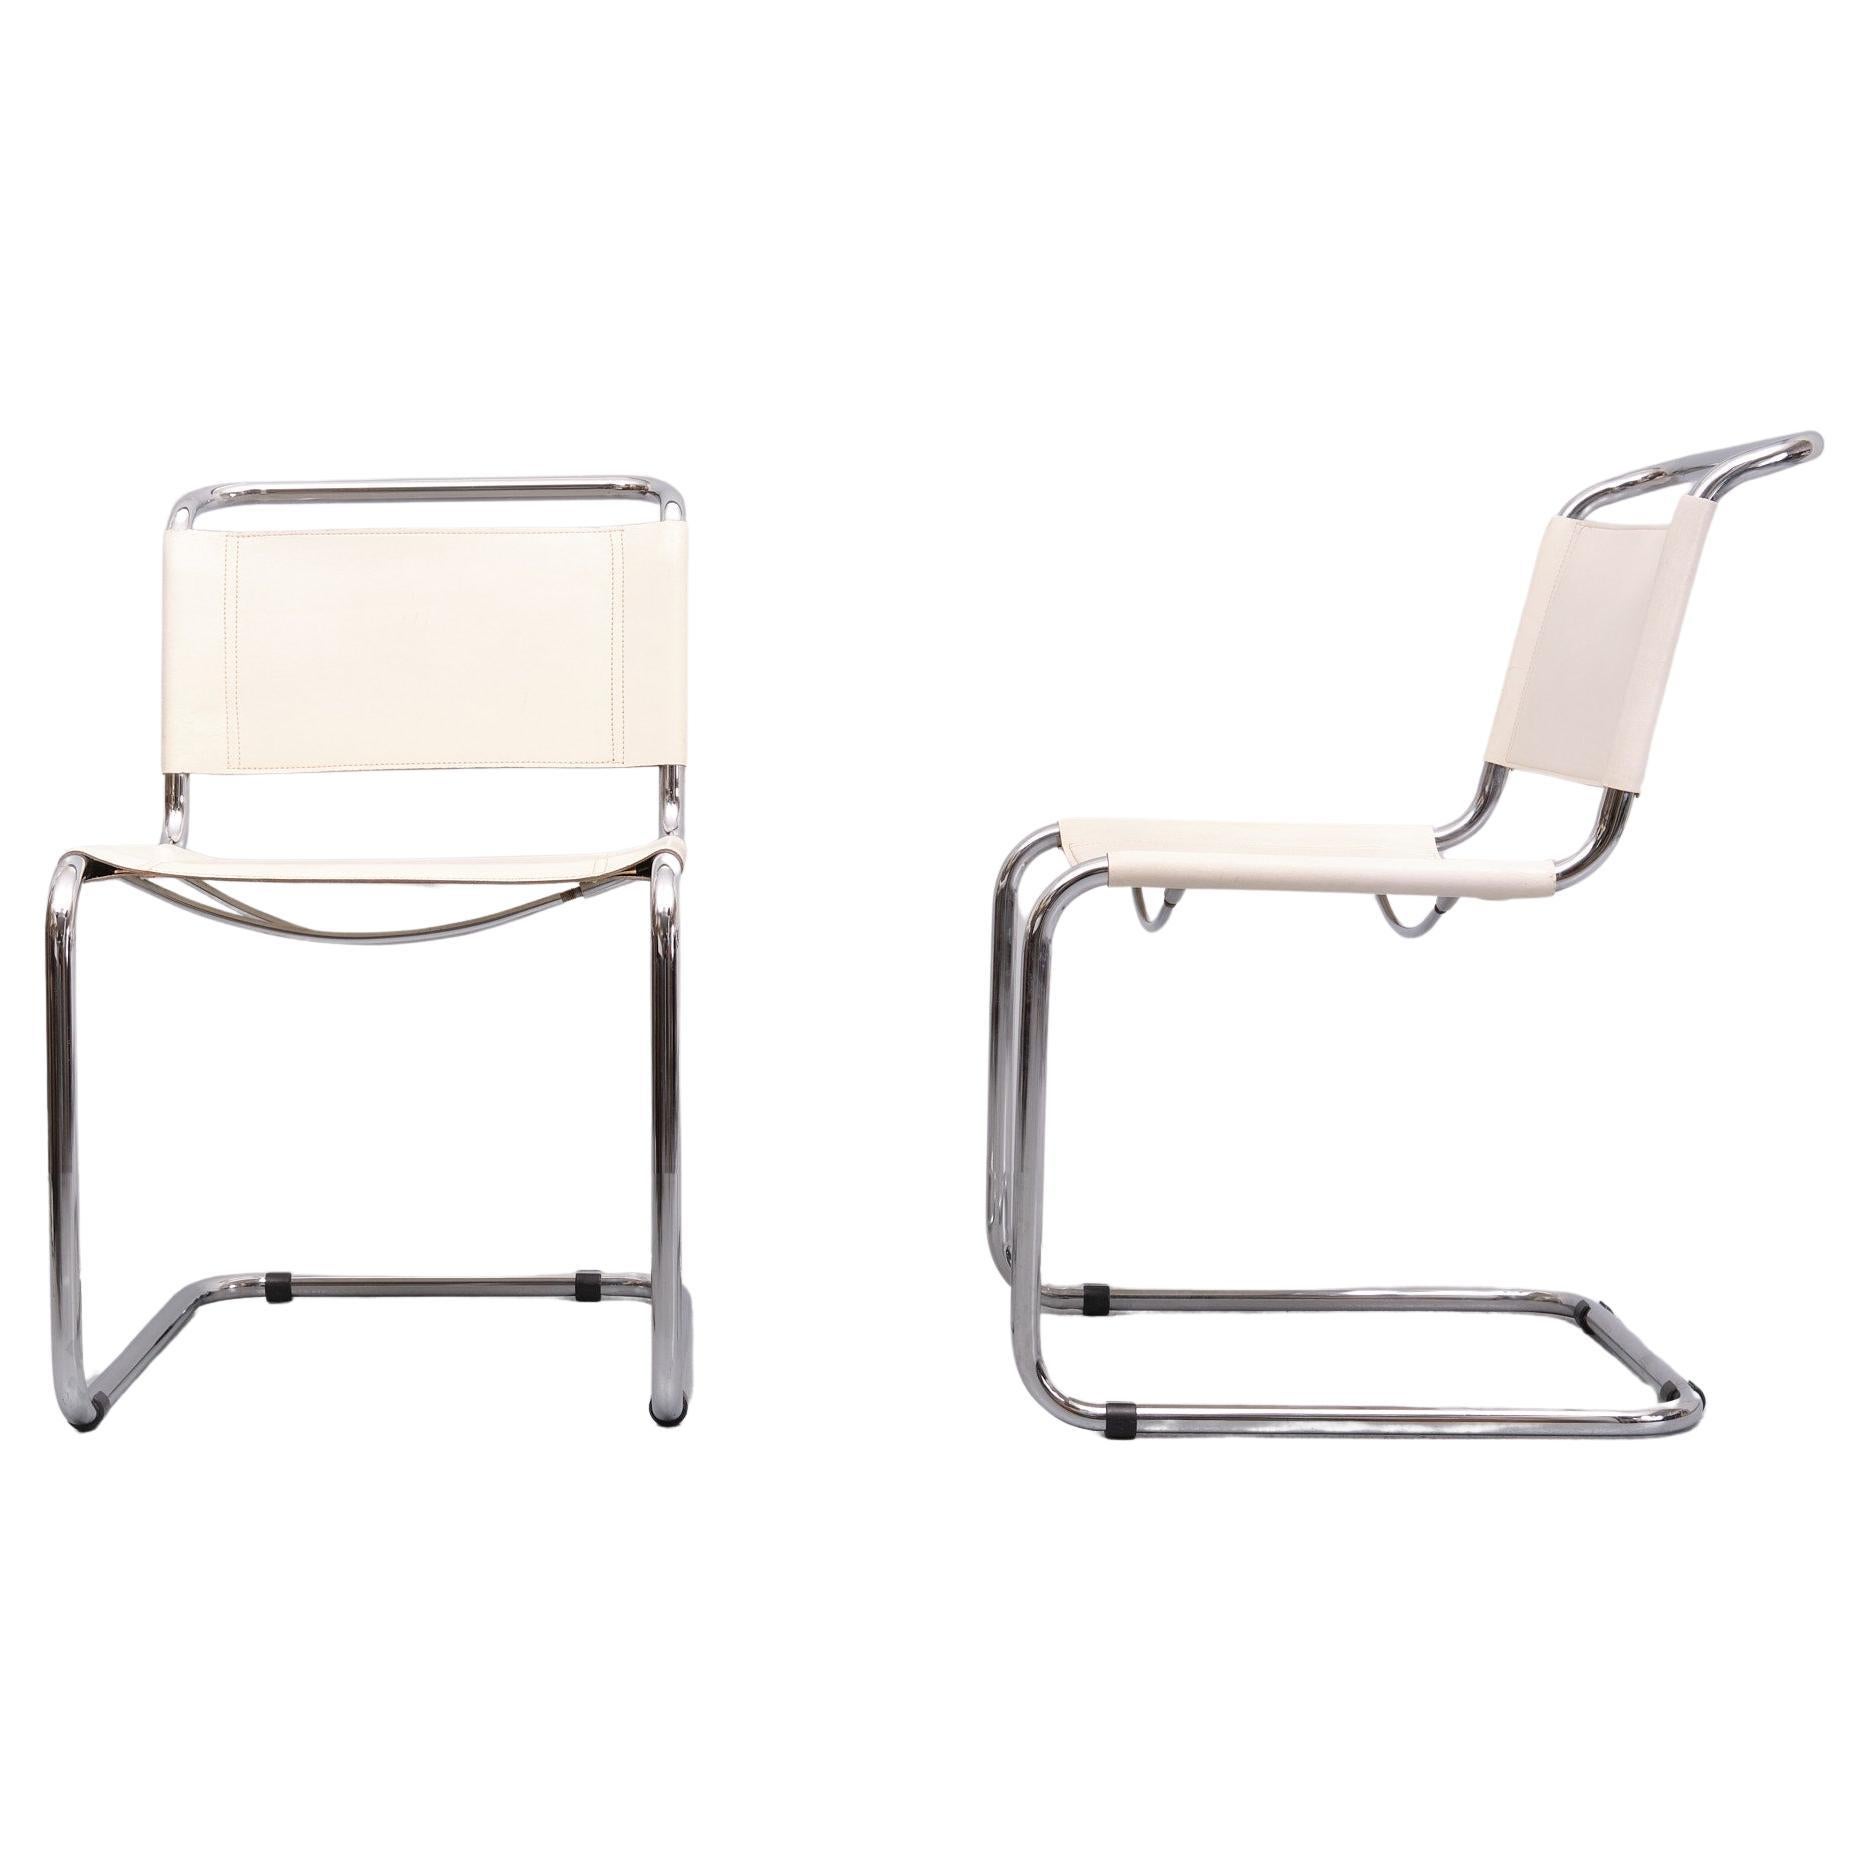 Two Original White Leather cantilever chair . Chrome Tube frame.  1970s 
Pioneering Dutch modernist architect-designer Mart Stam (1899-1966) was a famous proponent for New Objectivity, a German cultural movement advocating for a return to